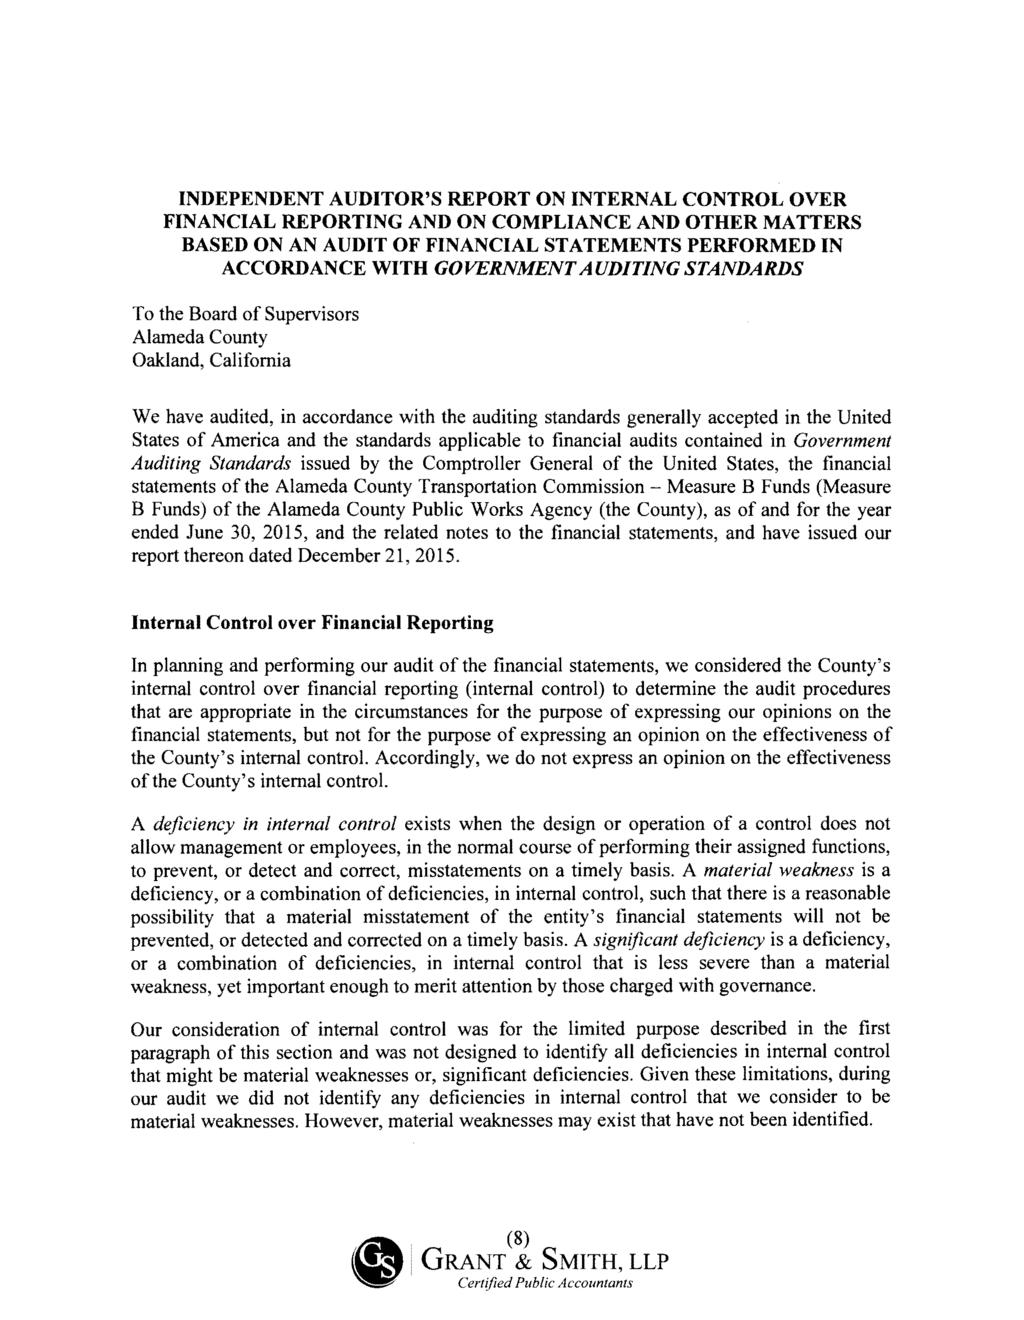 INDEPENDENT AUDITOR'S REPORT ON INTERNAL CONTROL OVER FINANCIAL REPORTING AND ON COMPLIANCE AND OTHER MATTERS BASED ON AN AUDIT OF FINANCIAL STATEMENTS PERFORMED IN ACCORDANCE WITH GOVERNMENT